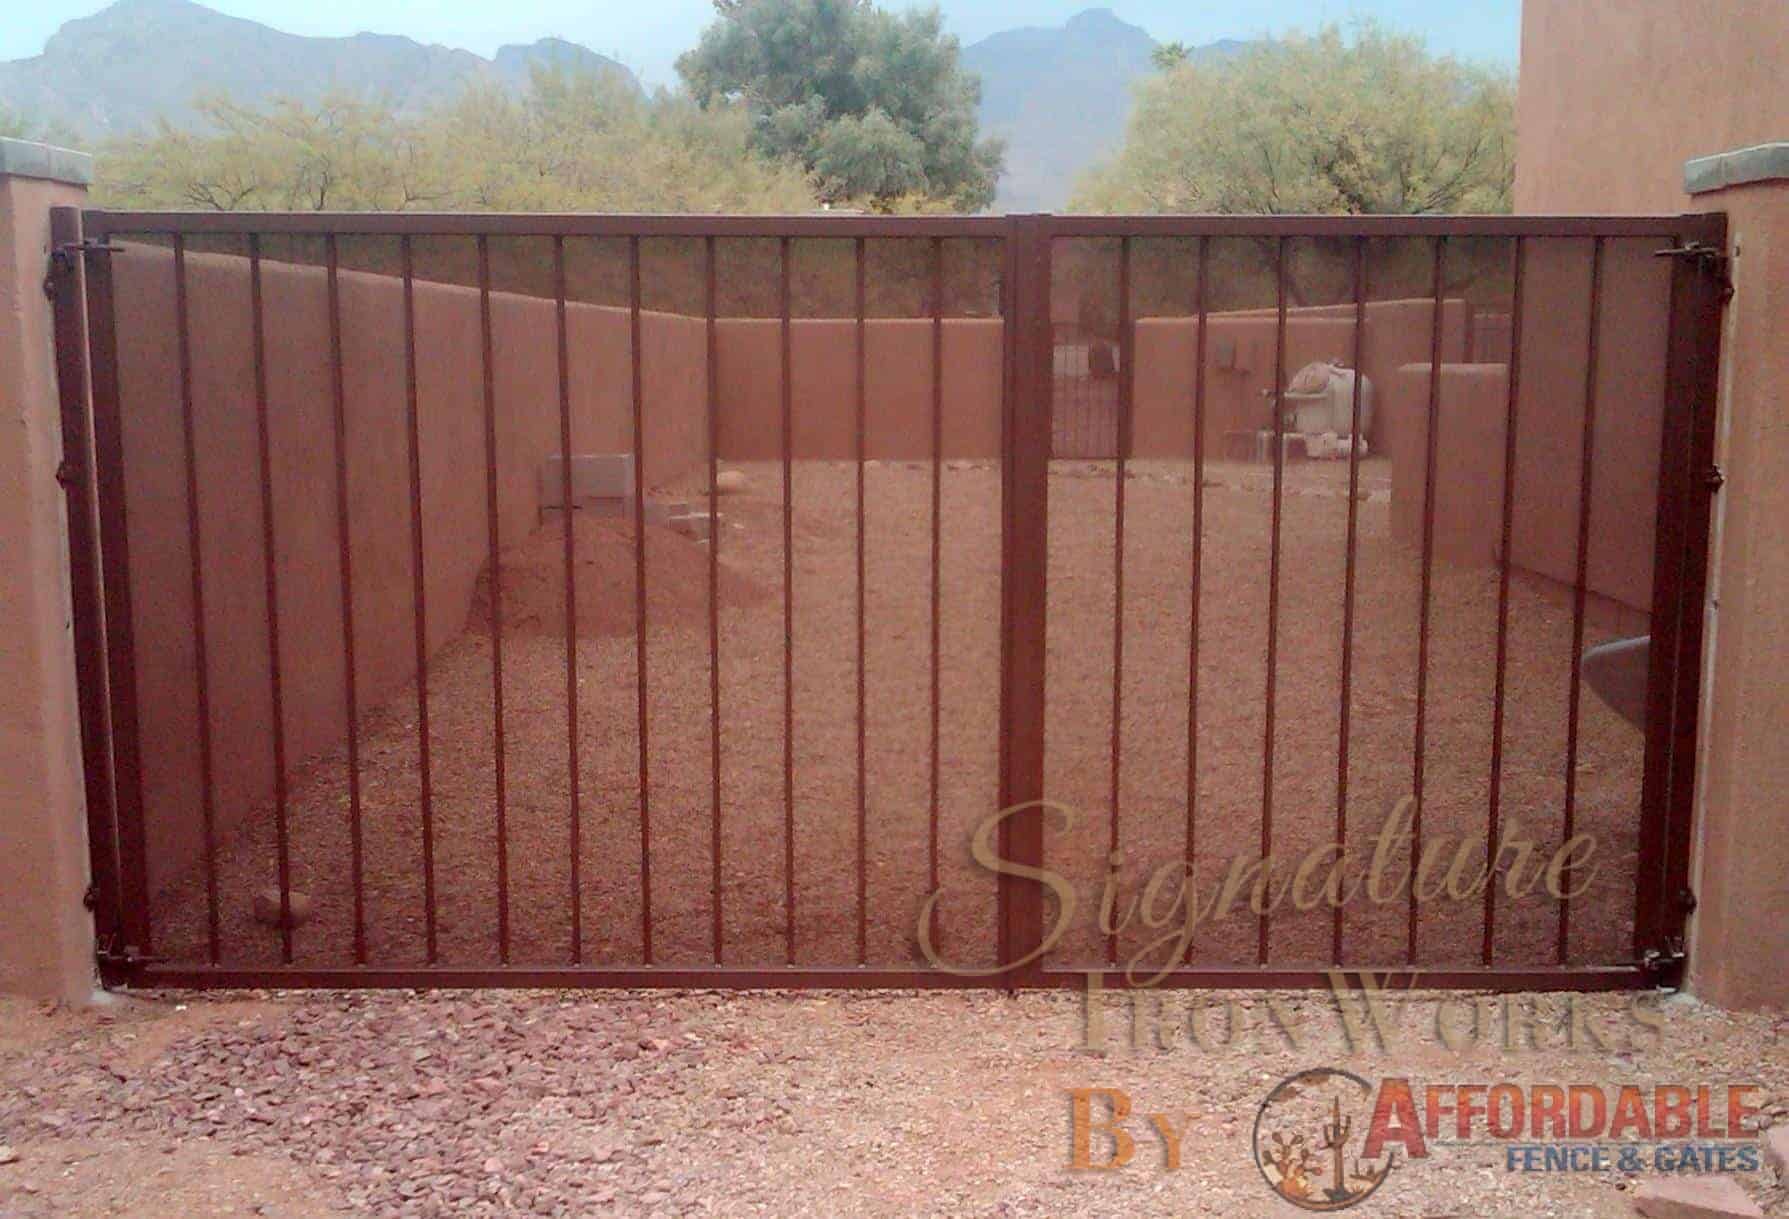 Asymmetrical wrought iron gate made in Tucson IG001-3